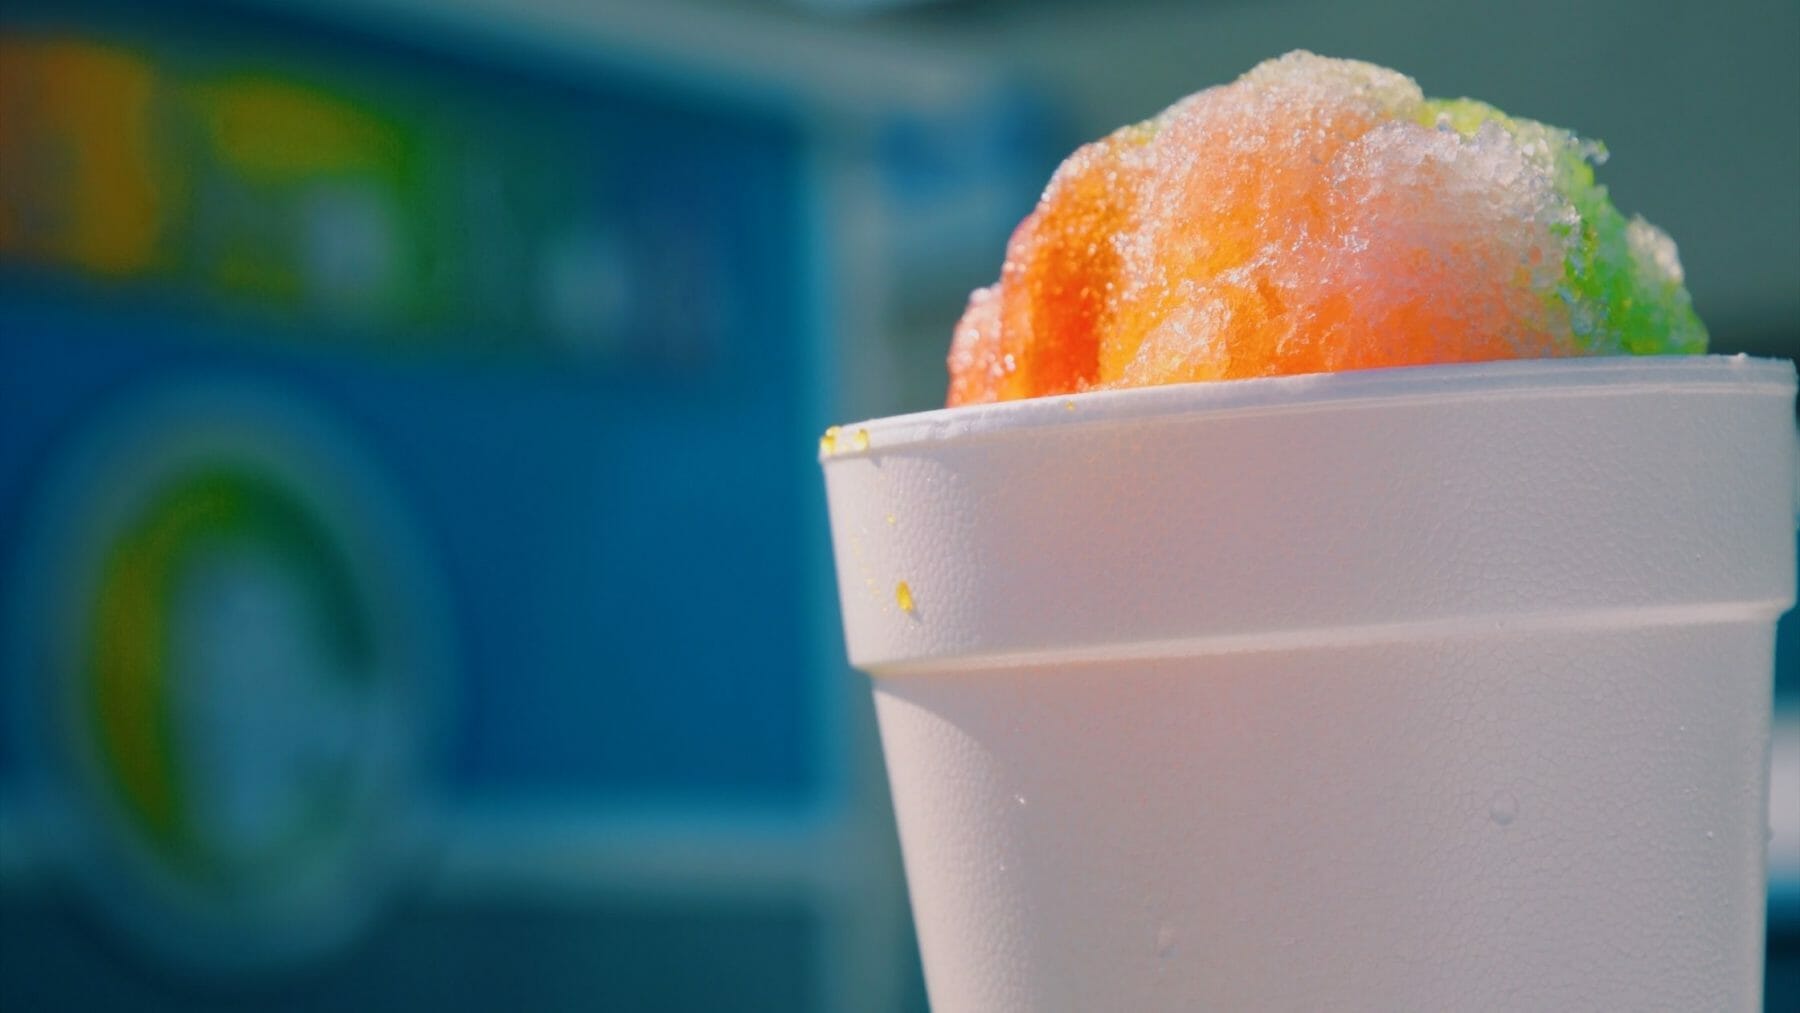 snow cone at pool party